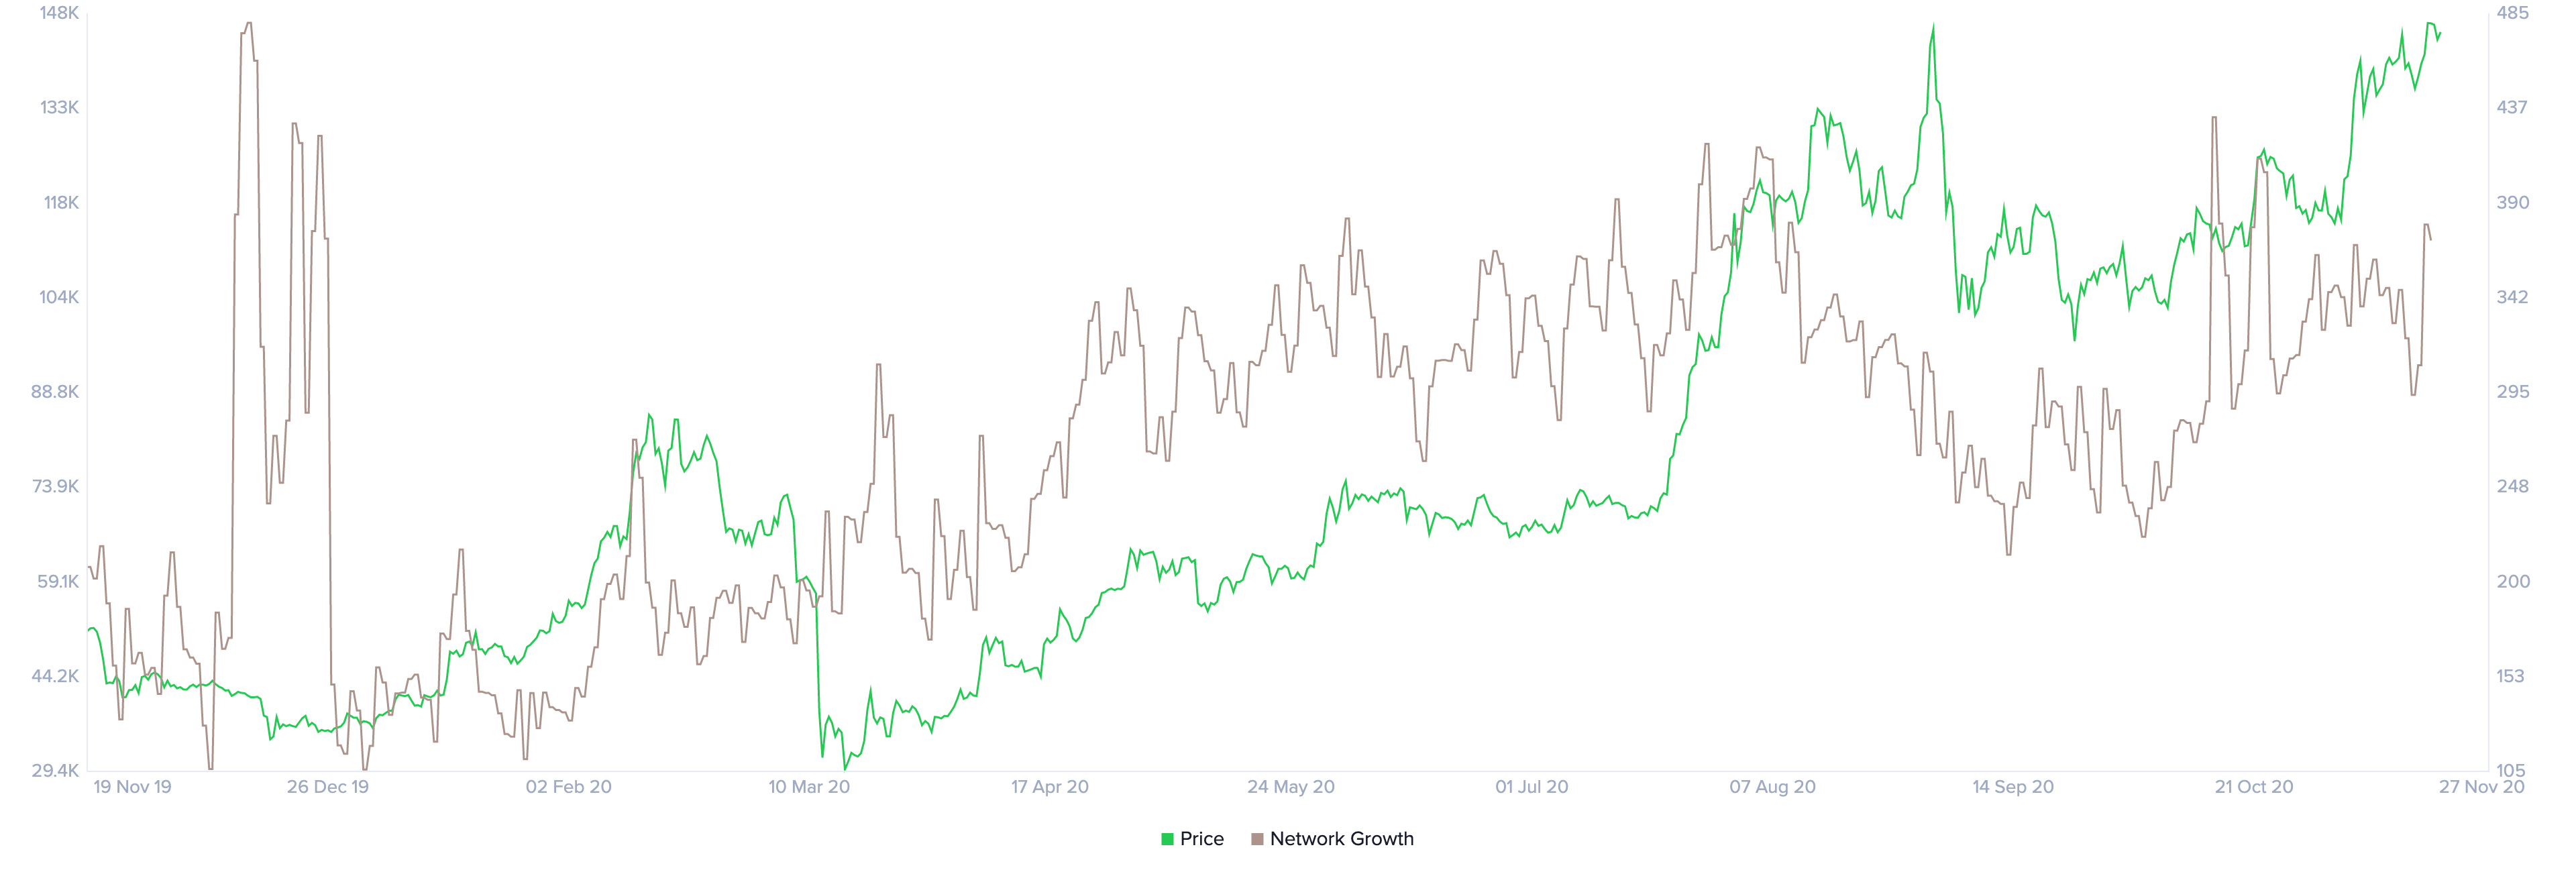 Ethereum's network growth